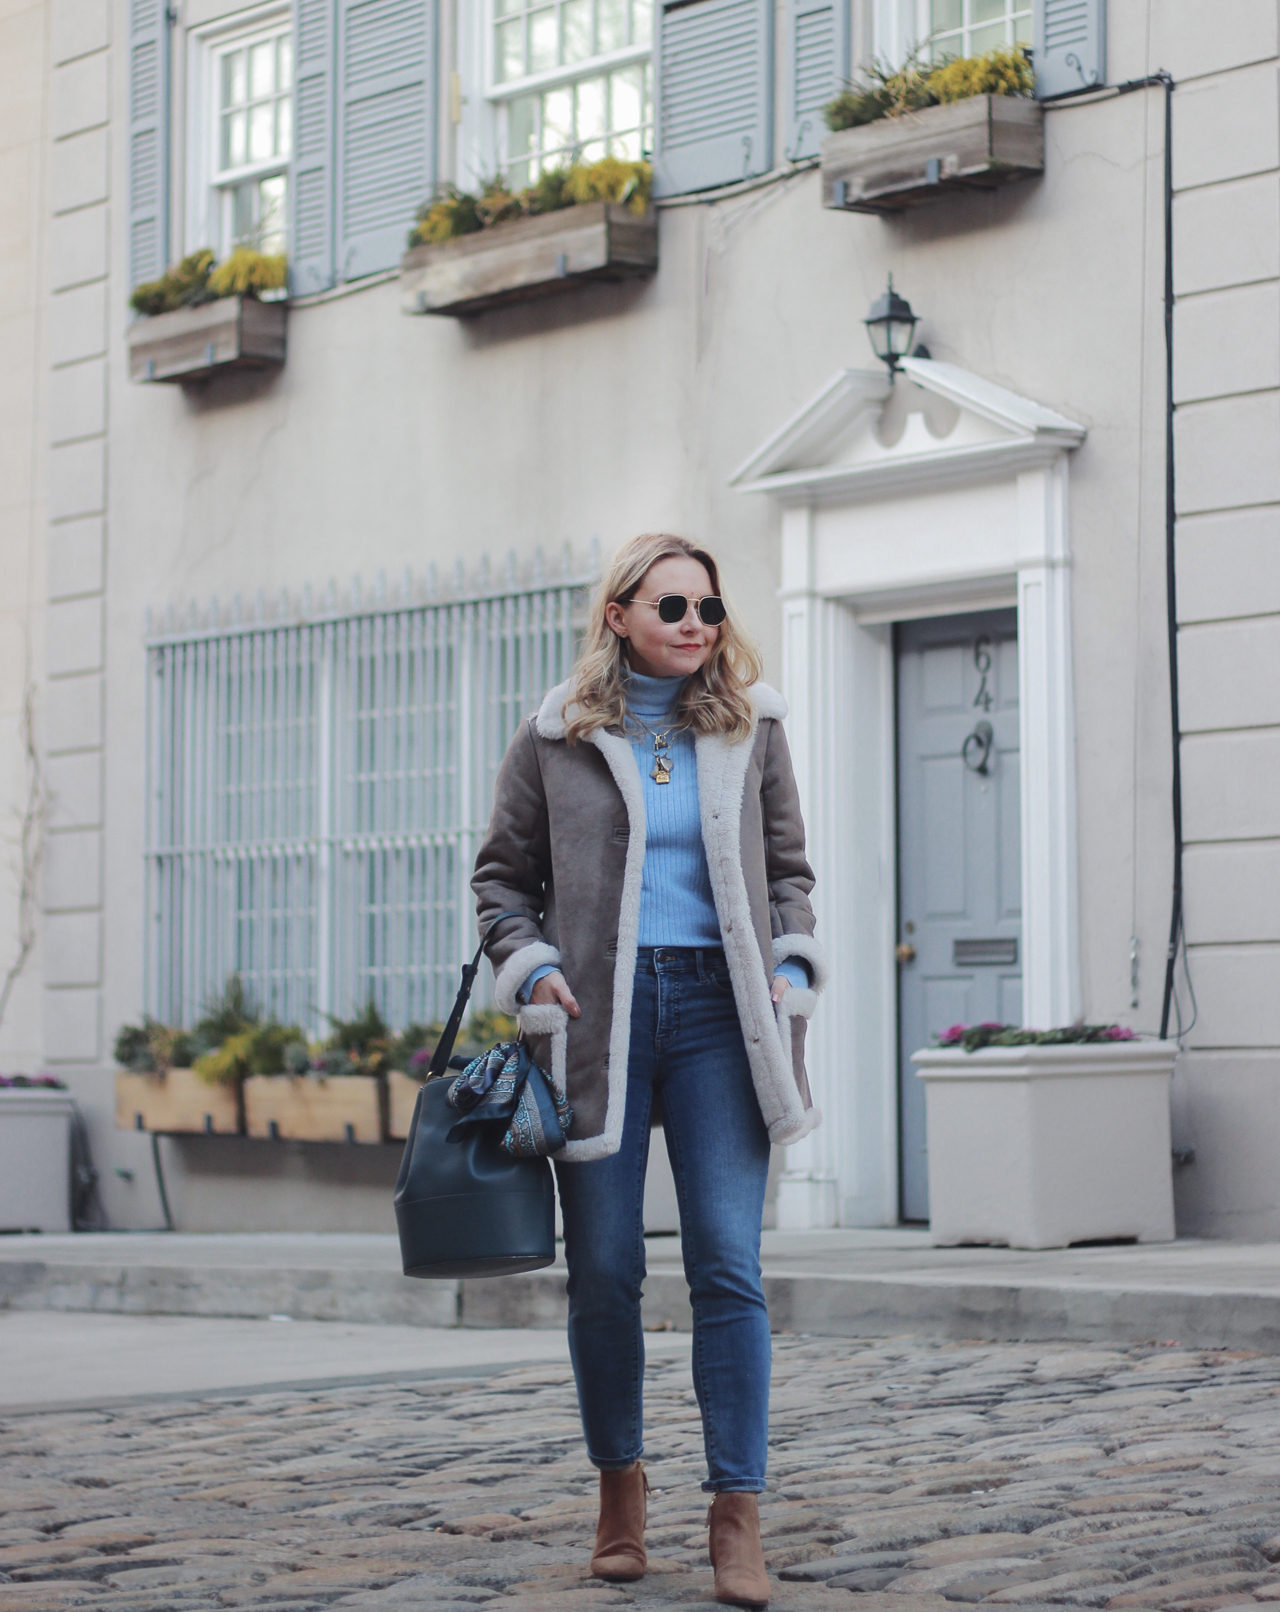 Dressing for Winter – Page 2 – Fashion, Travel & Lifestyle.